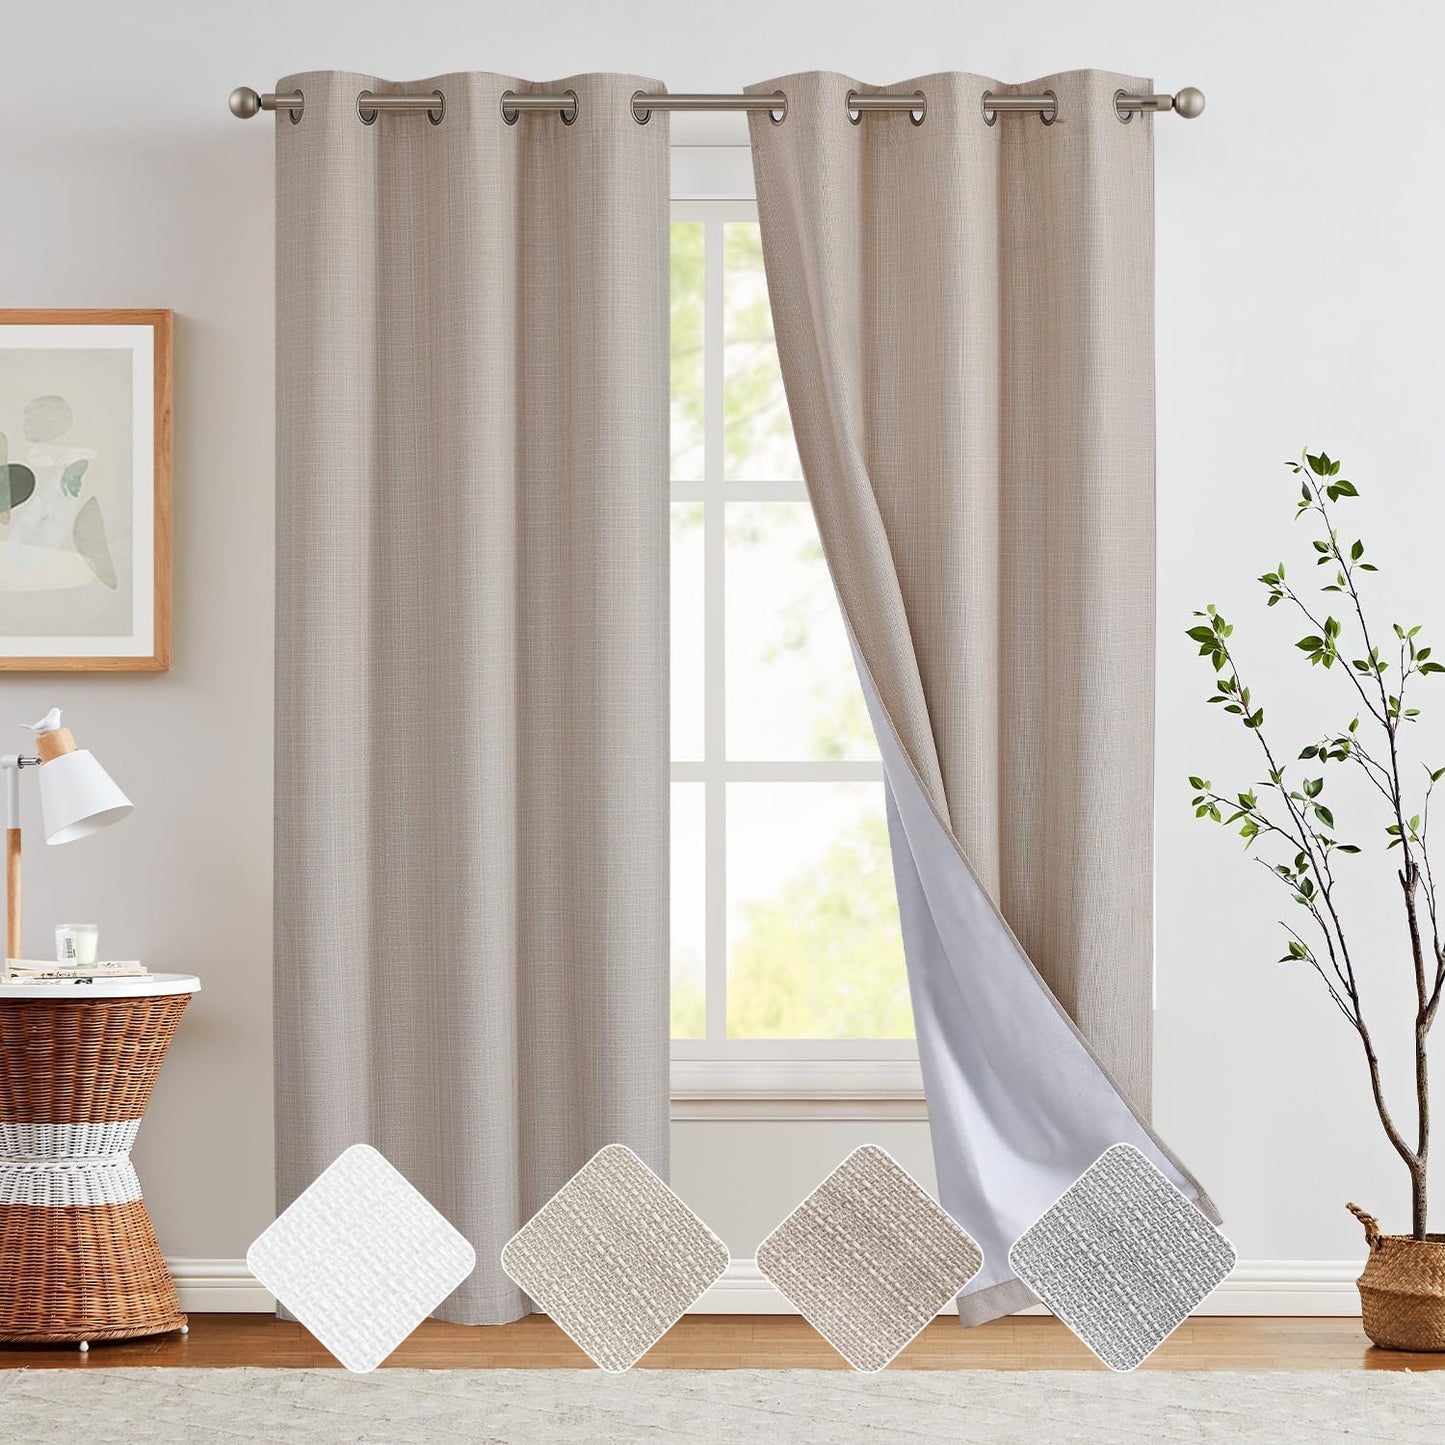 COLLACT White Linen Textured Curtains 84 Inch Length 2 Panels for Living Room Casual Weave Light Filtering Semi Sheer Curtains & Drapes for Bedroom Grommet Top Window Treatments, W38 X L84, White  COLLACT Blackout | Heathered Taupe W38 X L96 